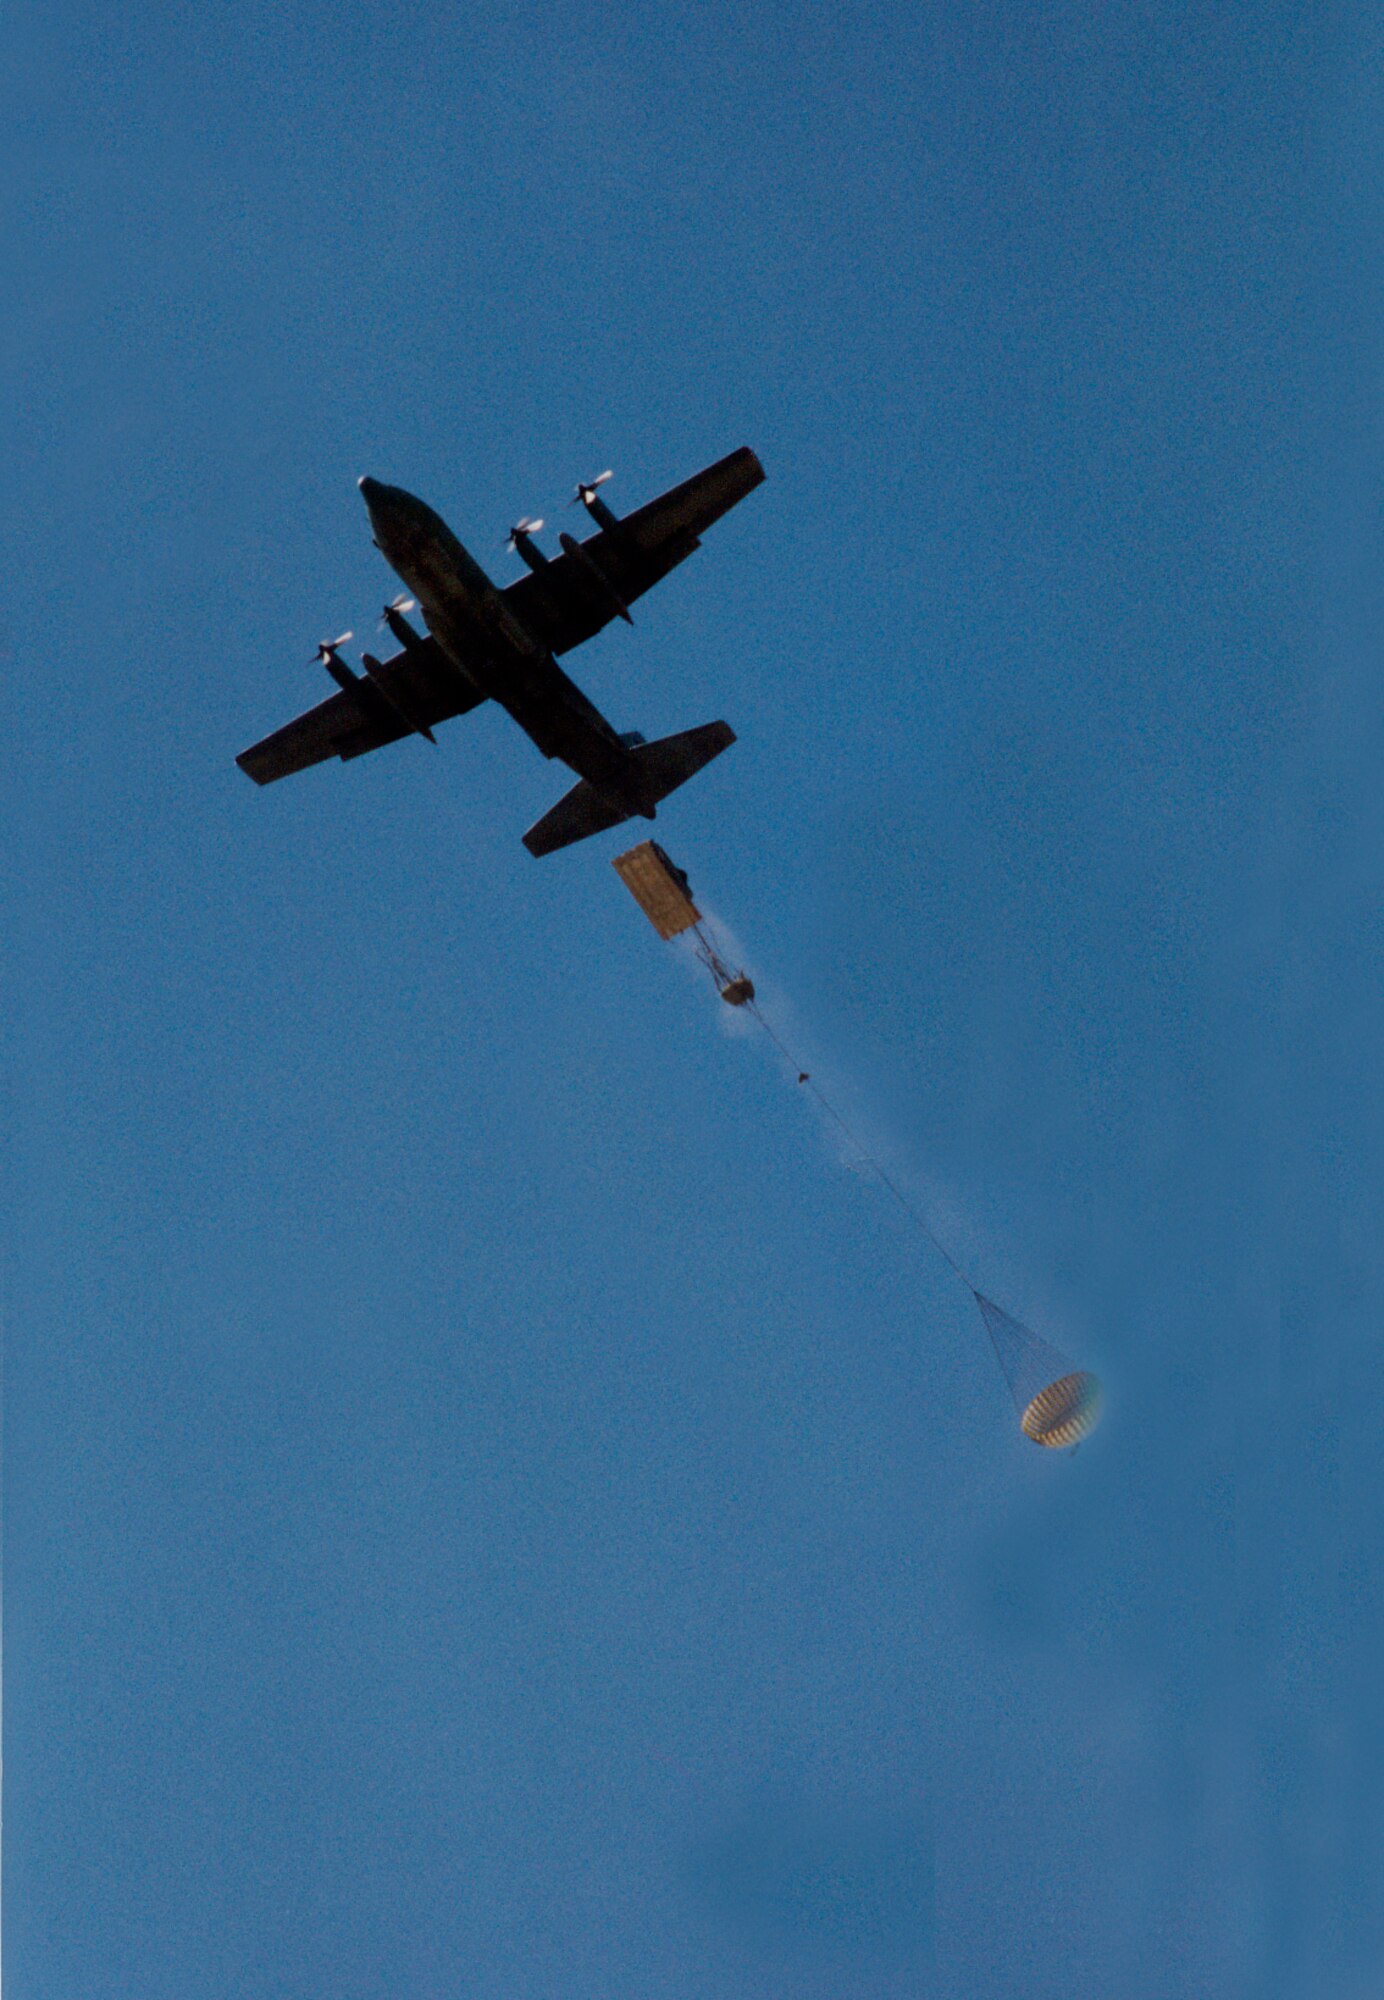 One of the 908th Air Lift Wing's eight C-130 Hercules aircraft practices dropping supplies on Maxwell Air Force Base. (U.S. Air Force photo by Lt. Col. Jerry Lobb)